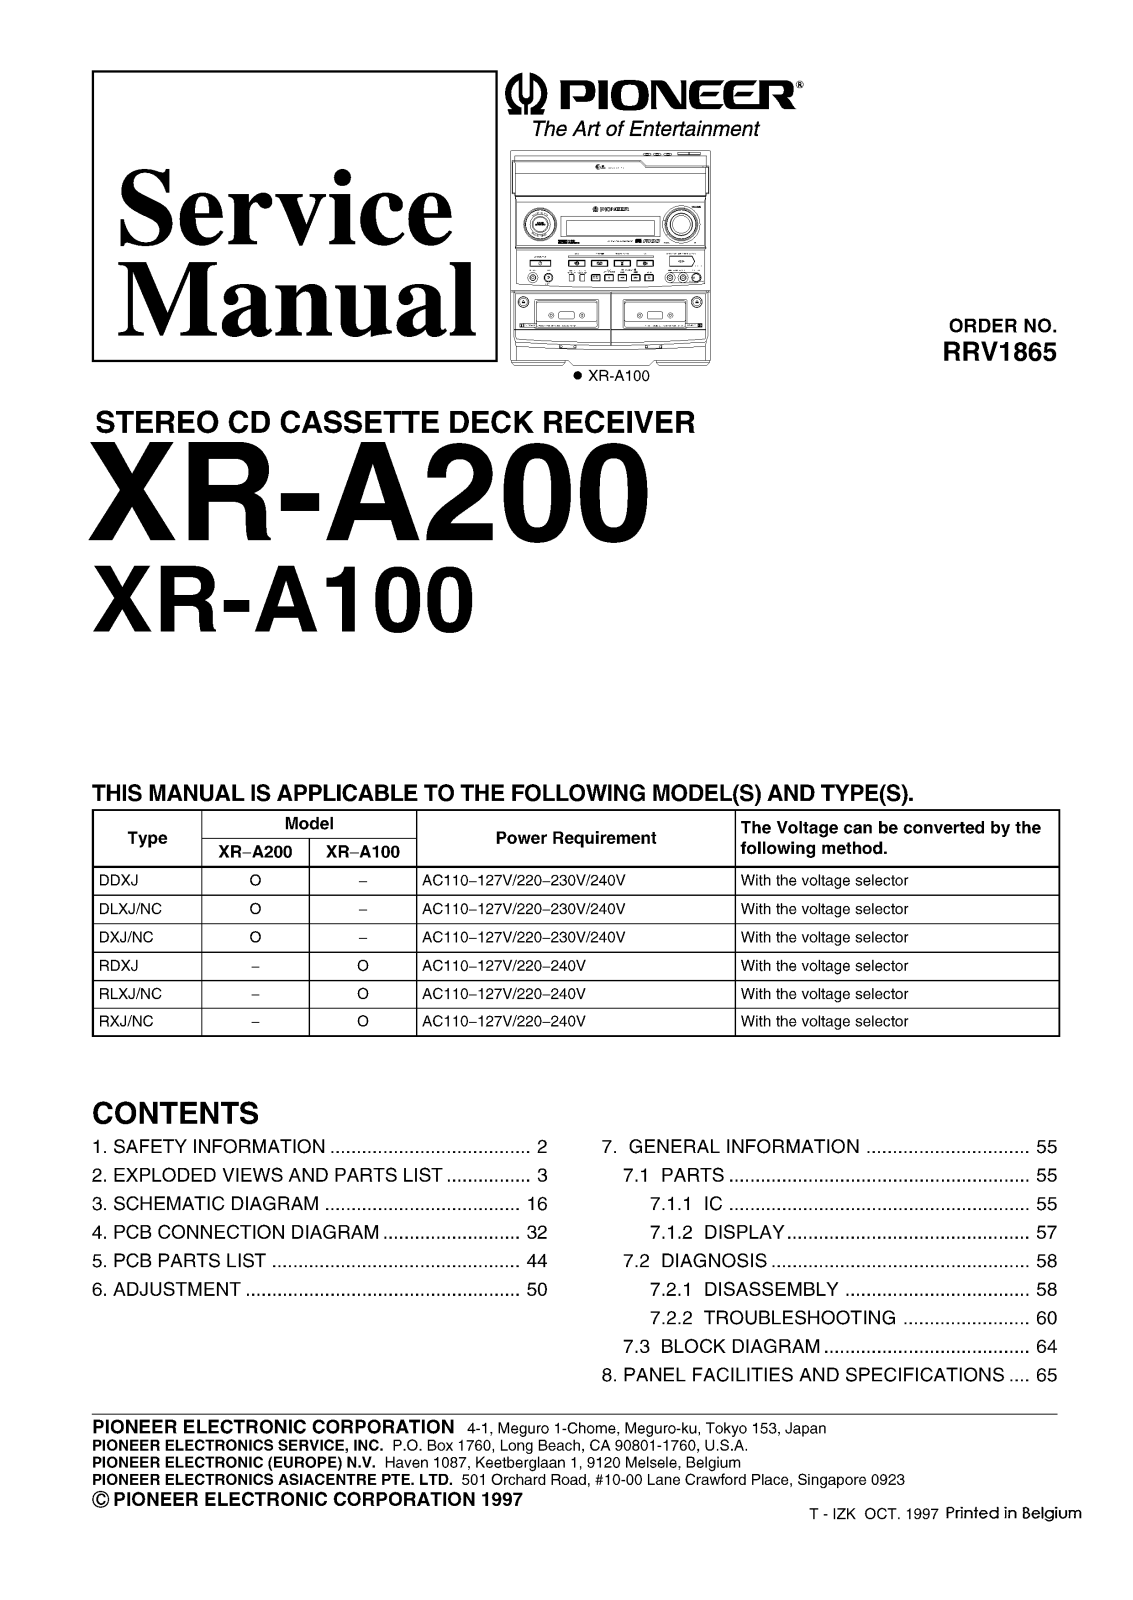 Pioneer XR-A100 Schematic